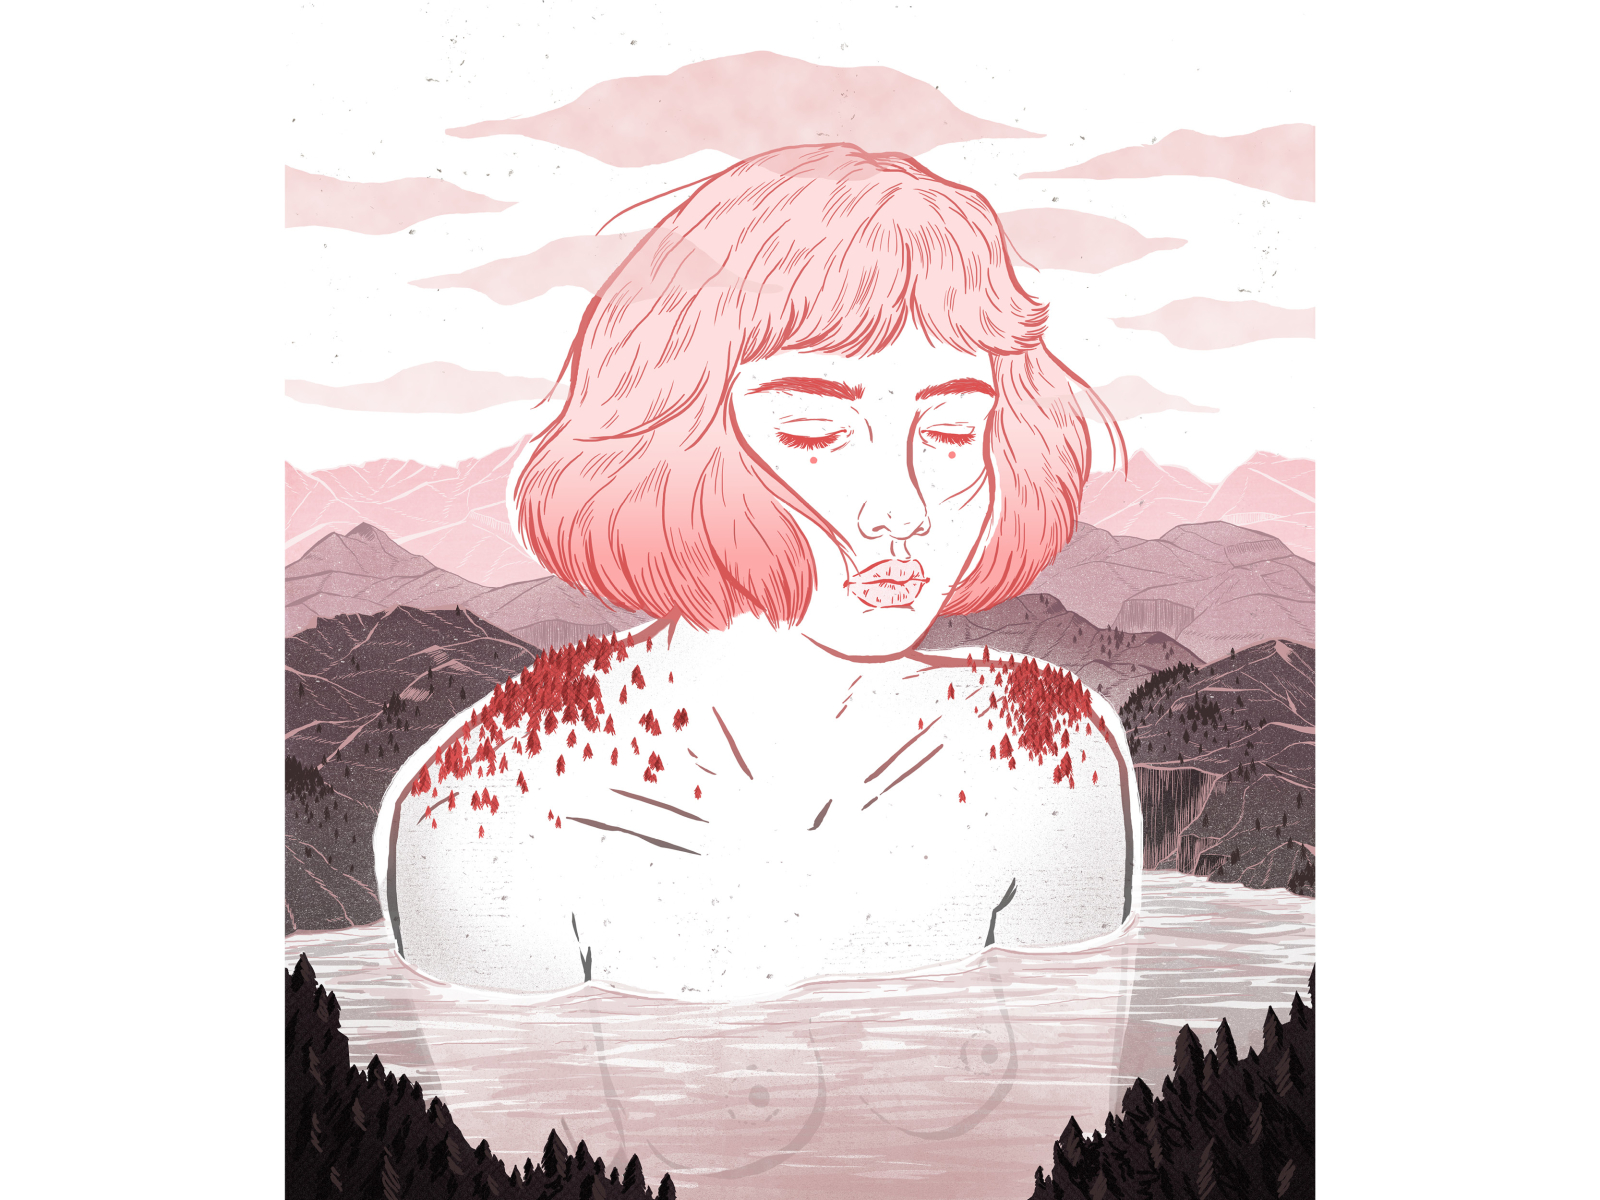 April: Who Had Her Head in the Clouds character clouds girl illustration illustration art meditation naked nude photoshop pink